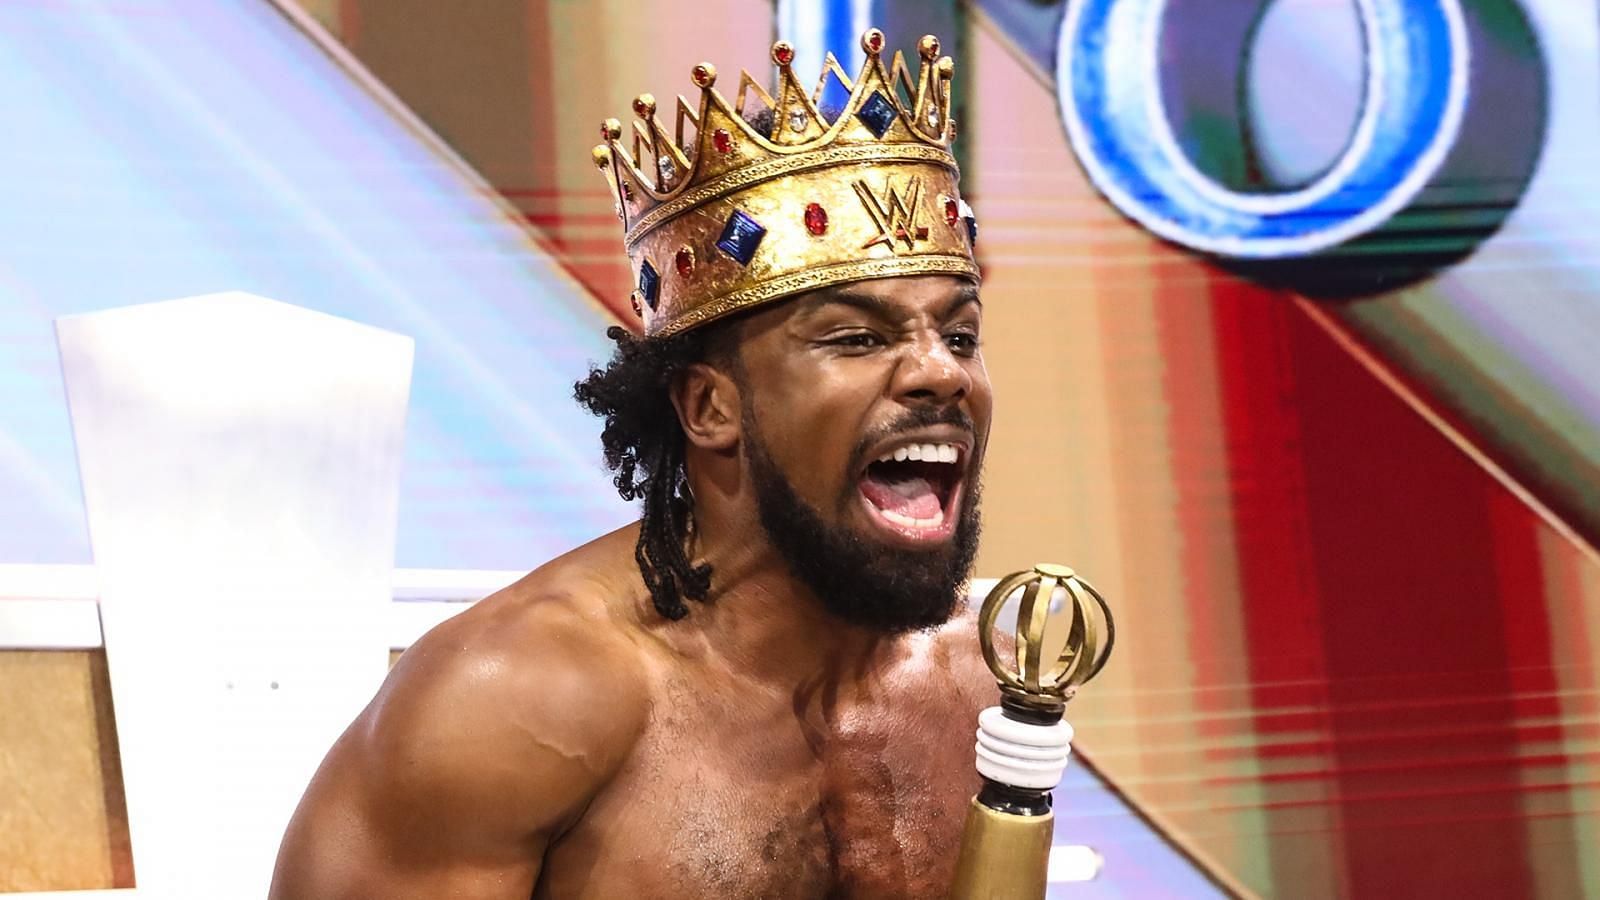 WWE Royal Rumble: King Woods set to miss the Royal Rumble PPV event, check why